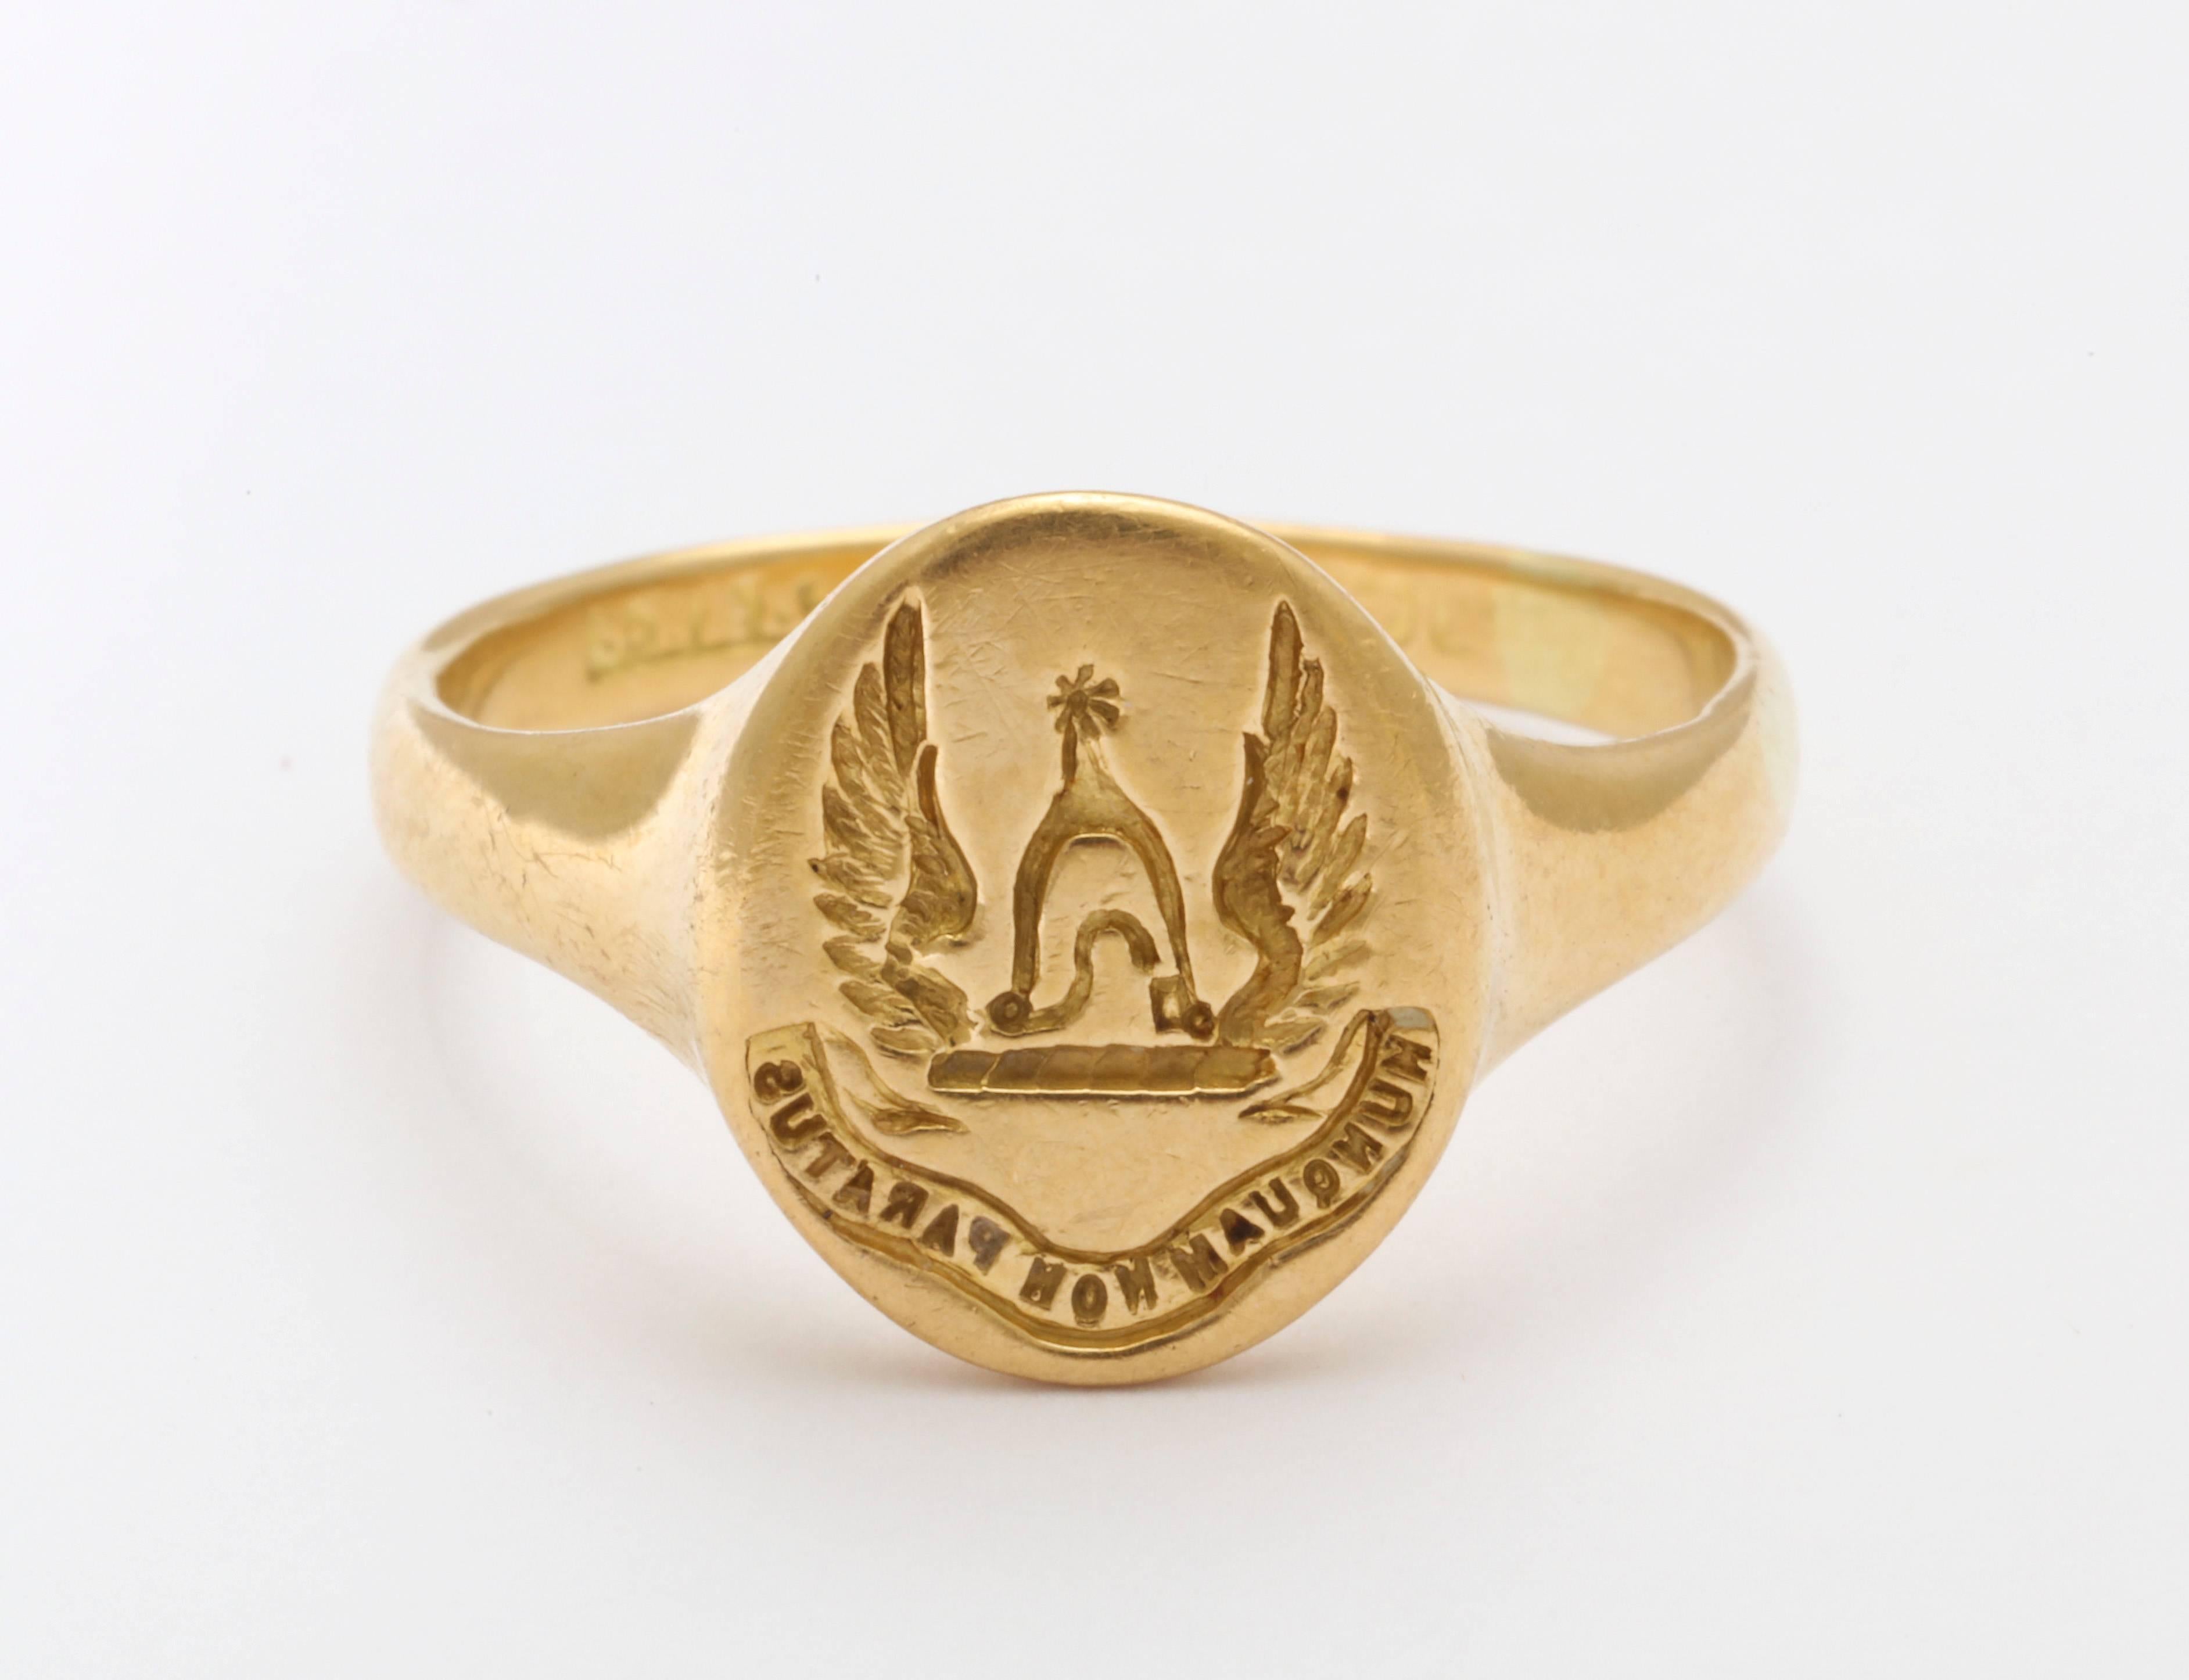 A stylized eagle is the signet of this ancient Scottish clan's ring of beautifully soft toned 18 kt gold, c. 1860-1880.  The engraving is crisp and clear. Ring size is 8 1/2. Bring it to a fine jeweler to size so that the sizing is not obvious. The